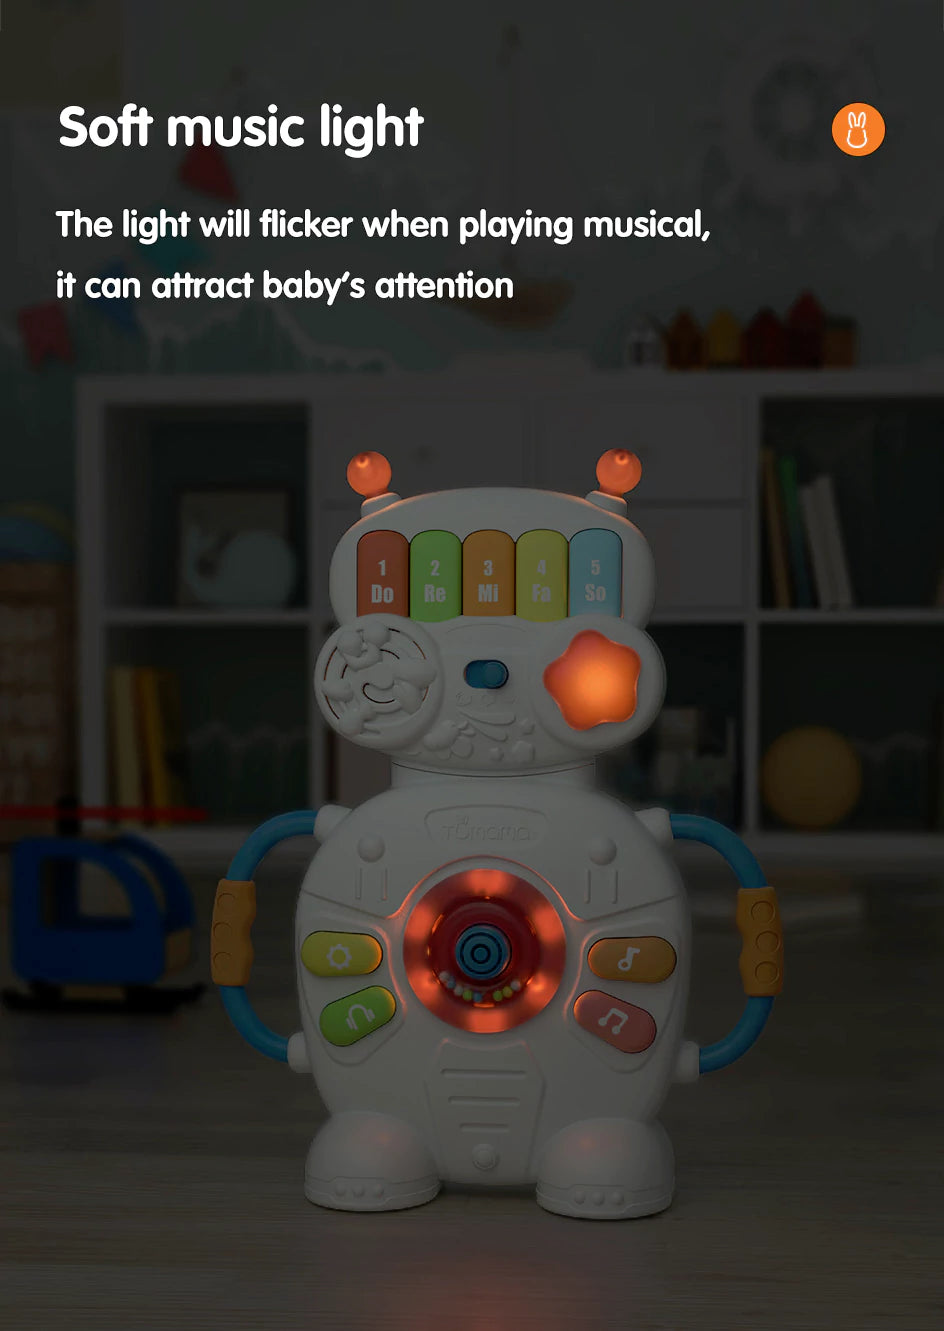 Robot instrument for early learning and musical exploration